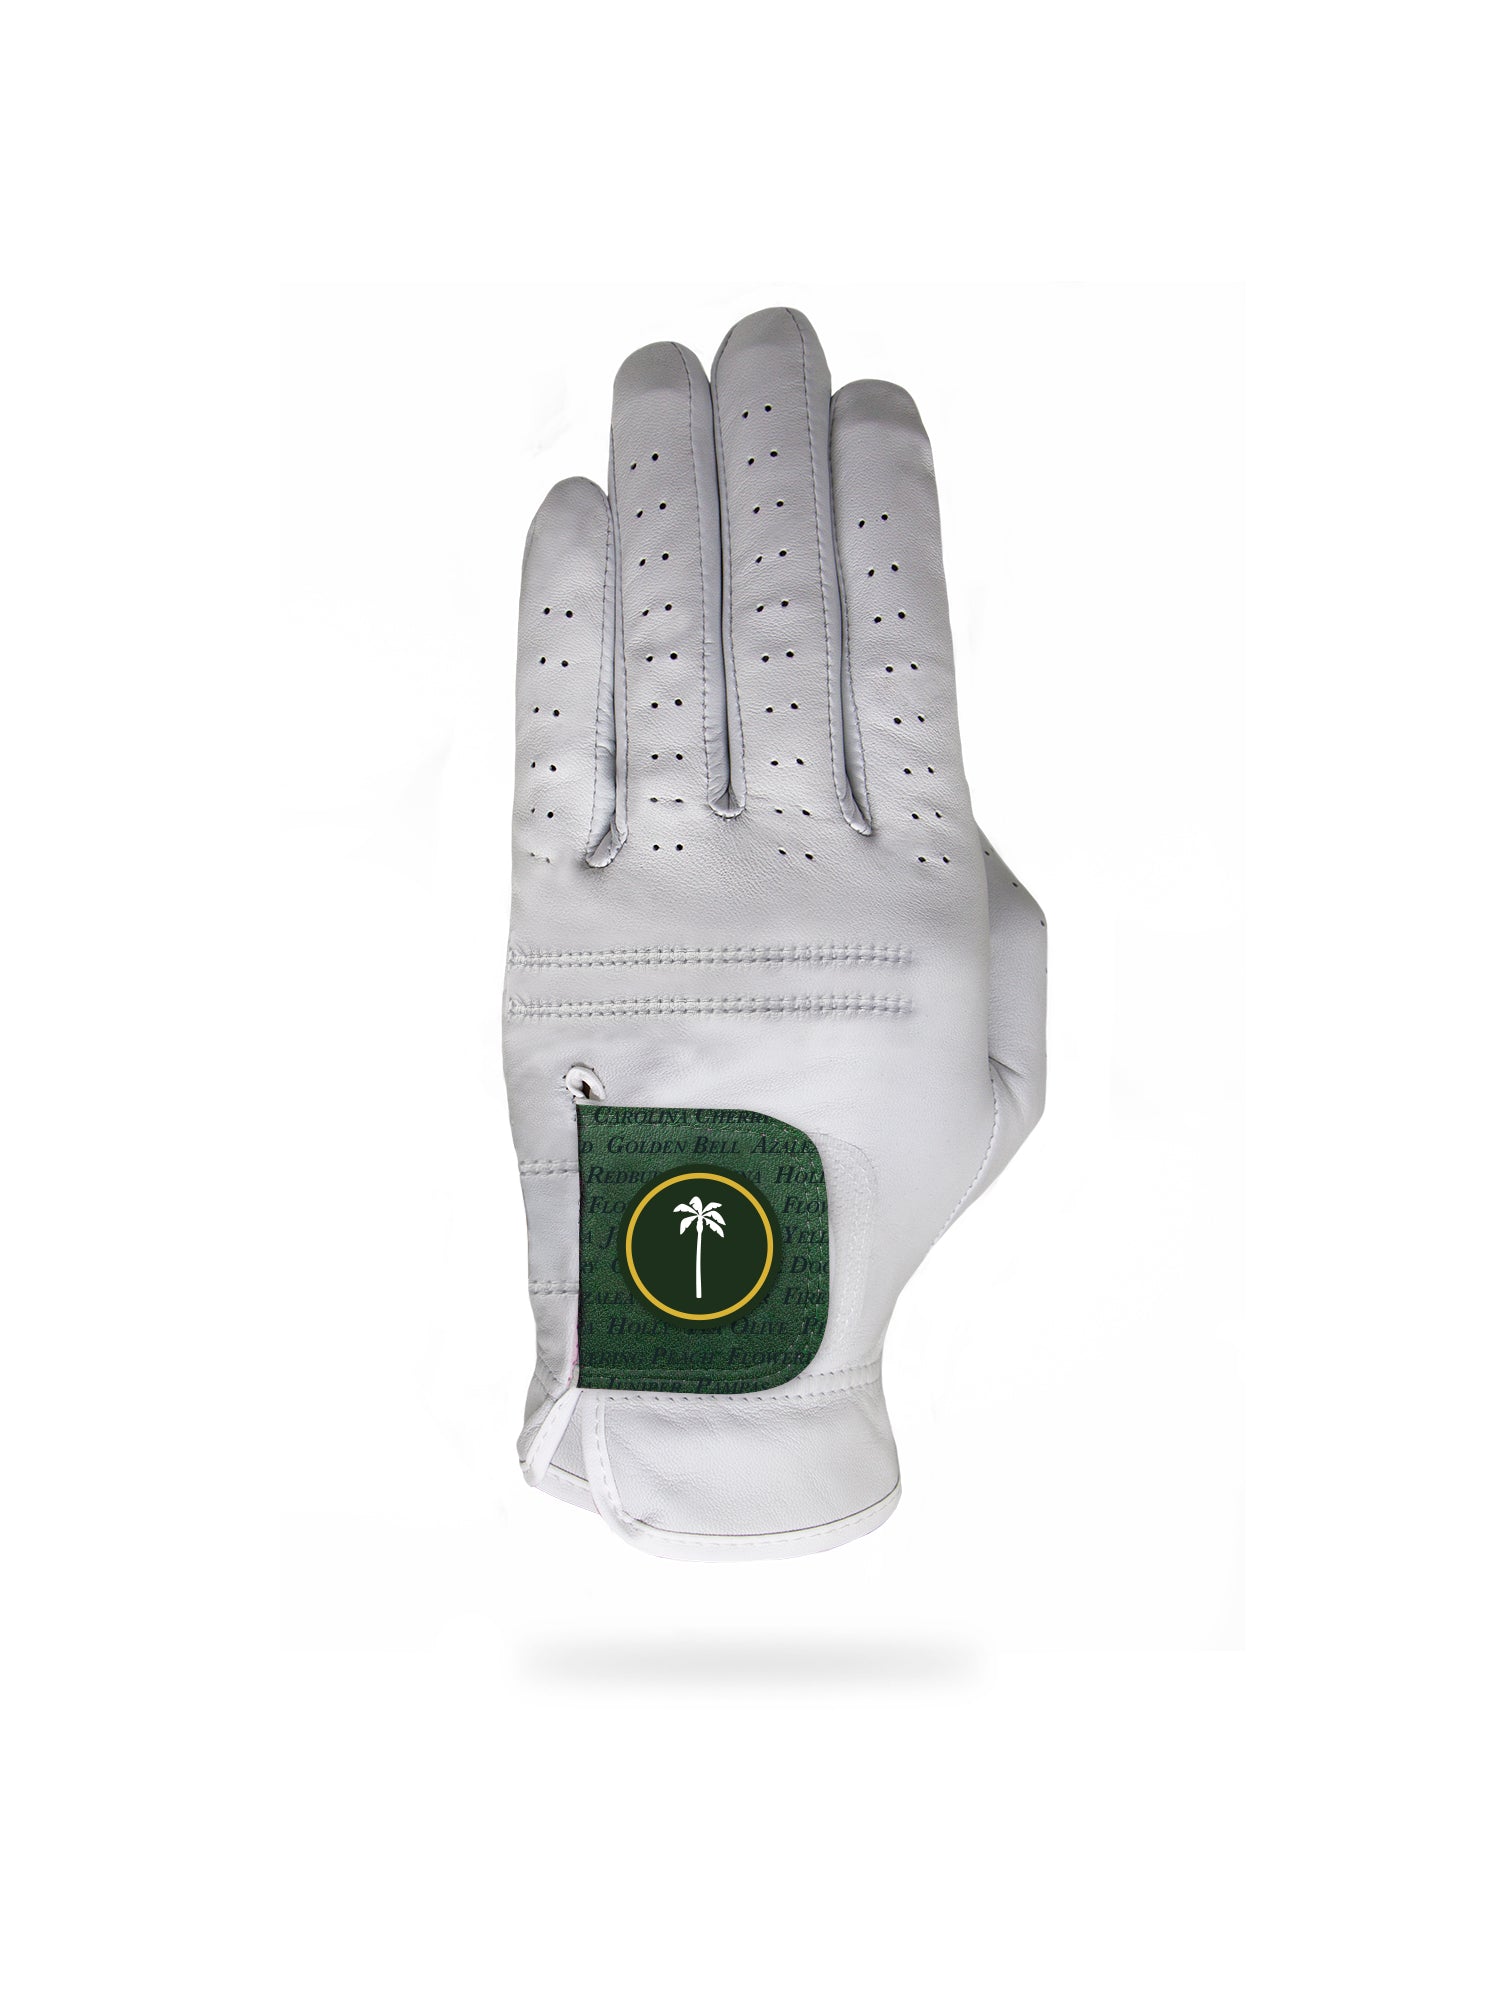 Palm Golf Co. Men's Tradition Glove